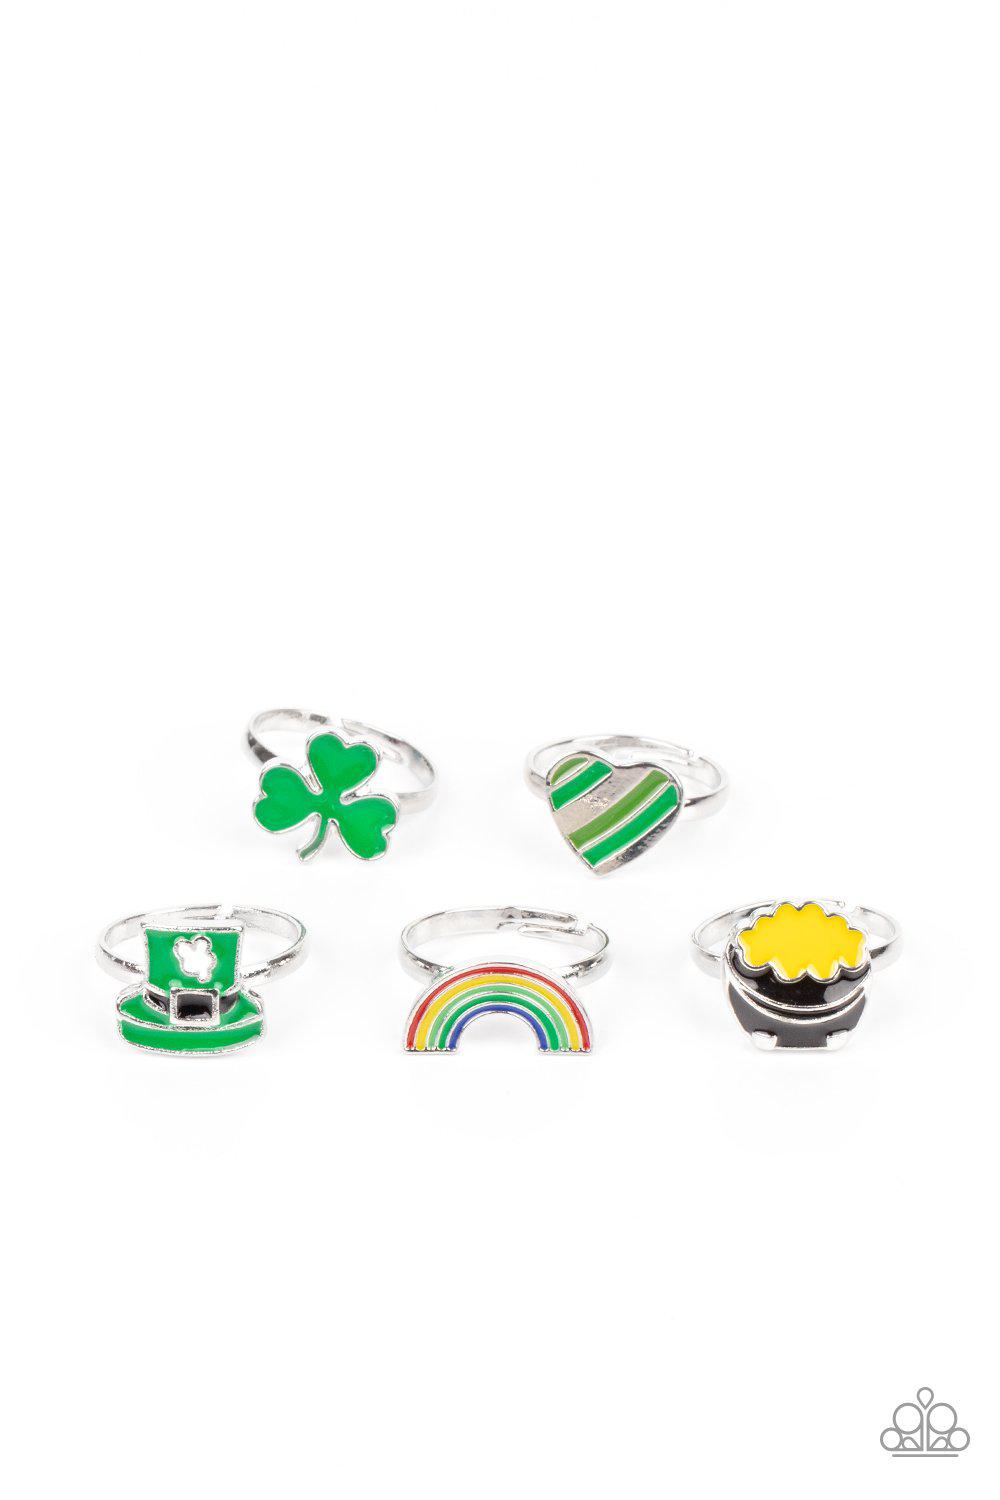 Starlet Shimmer Children's St. Patrick's Day Rings - Paparazzi Accessories (set of 5) - Full set -CarasShop.com - $5 Jewelry by Cara Jewels